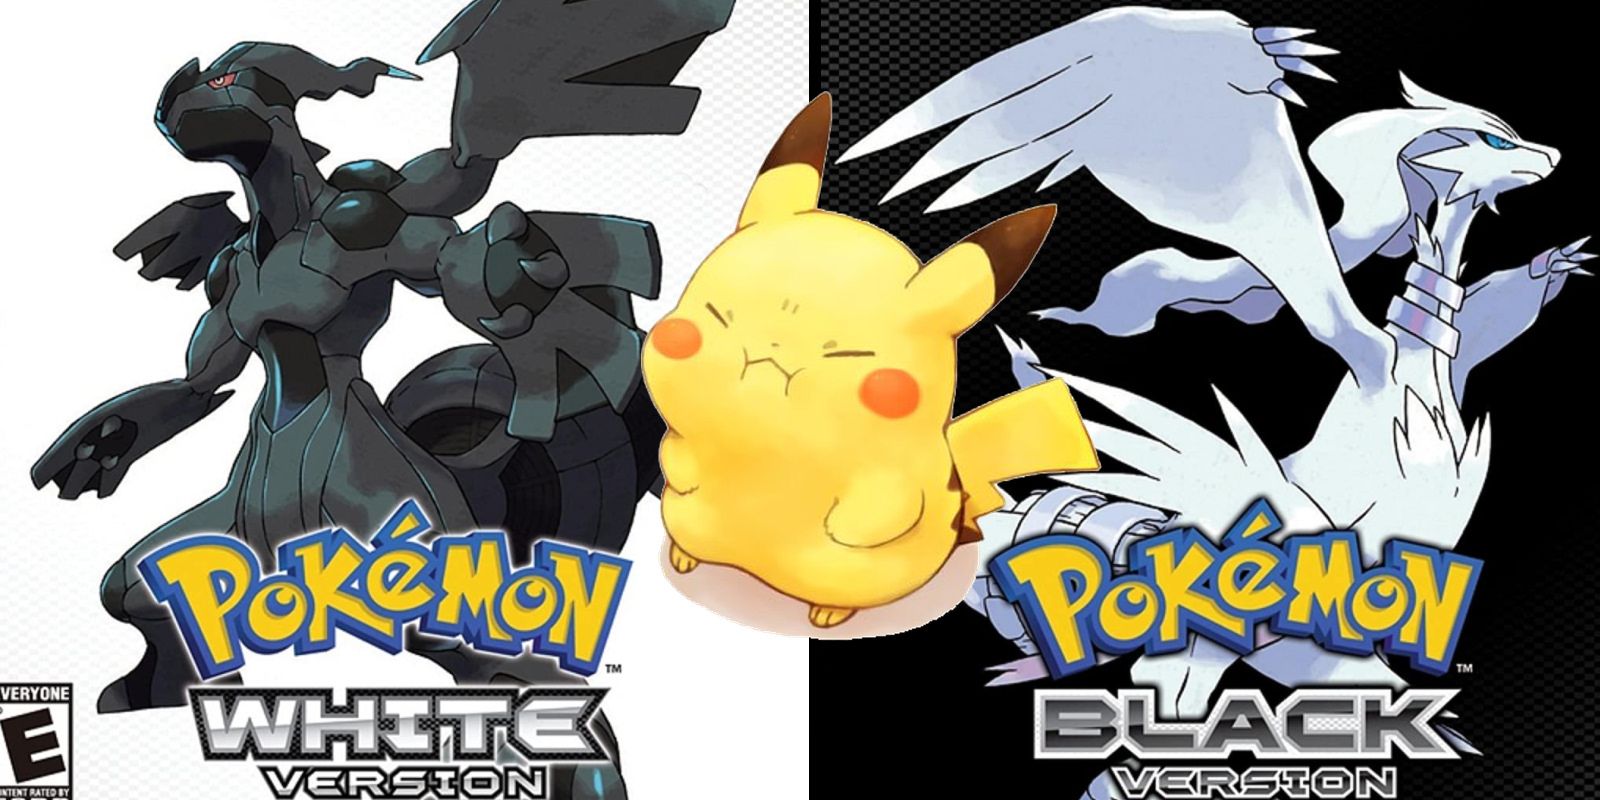 How Pokémon Gen 5 Remakes Can Avoid Repeating BDSPs Mistakes